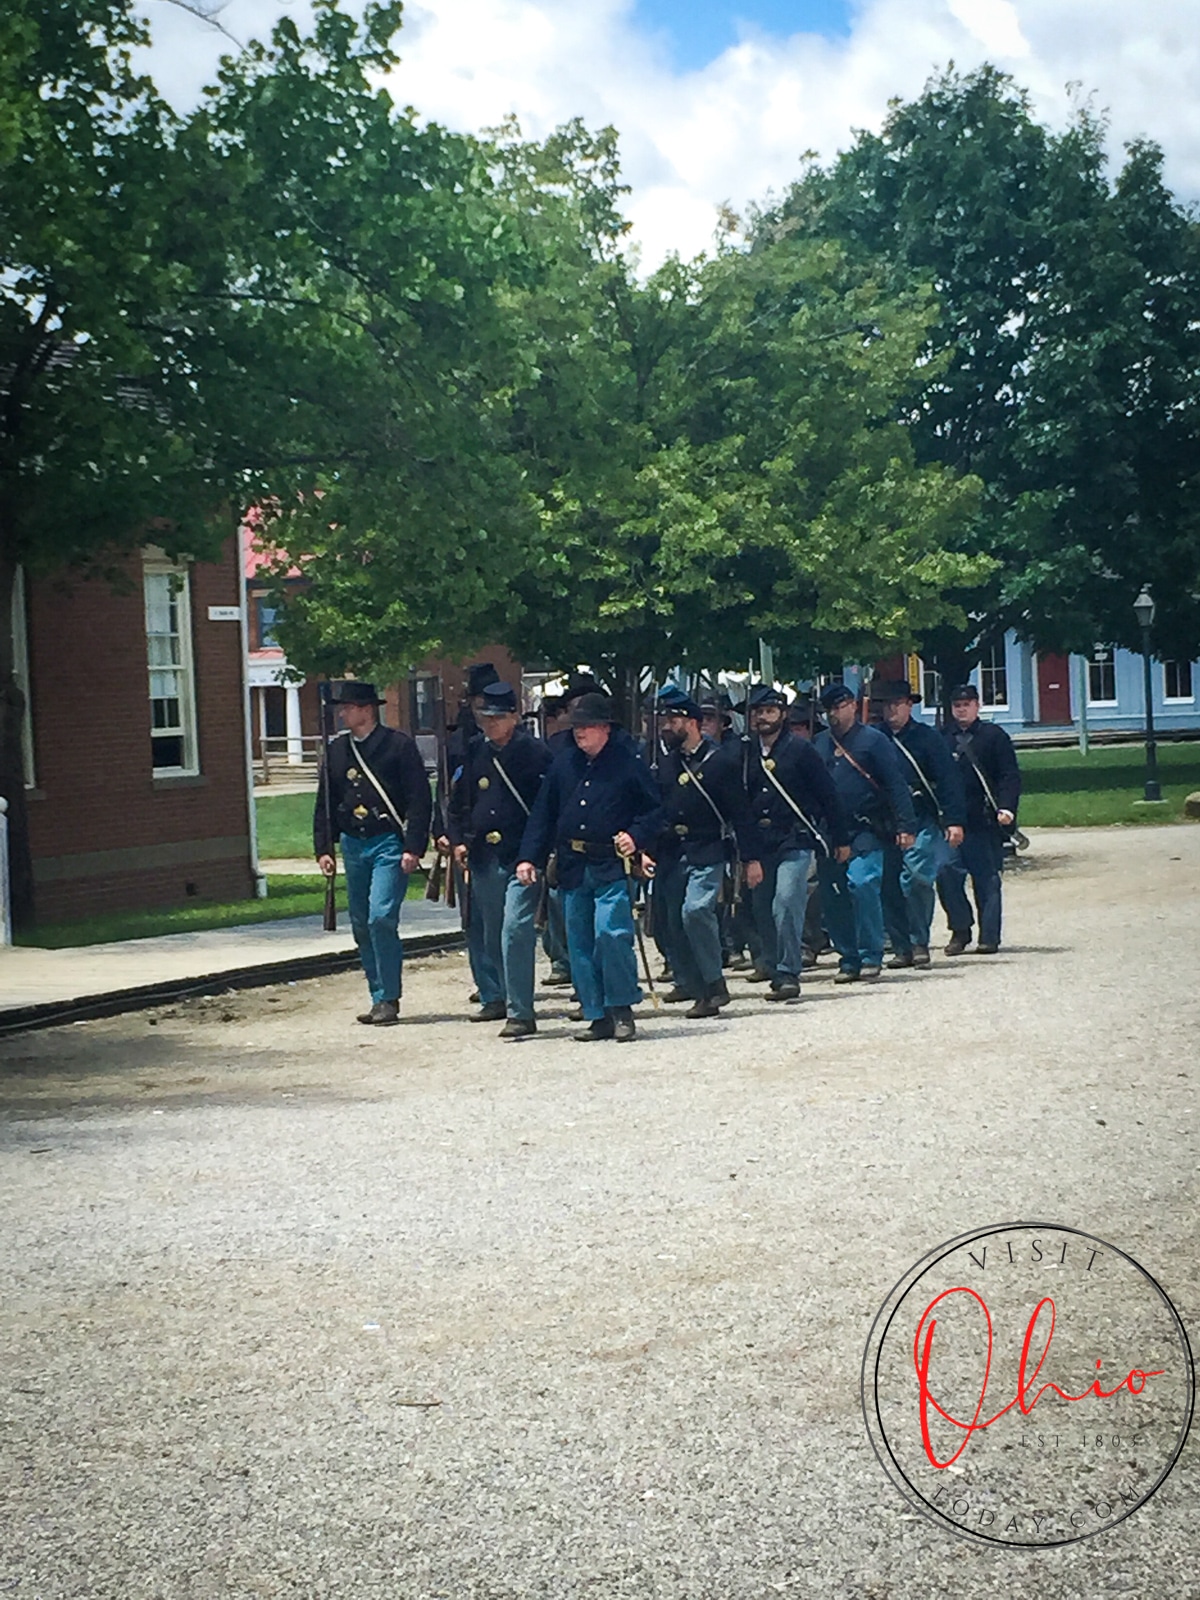 civil war army marching down dirt road at Ohio village